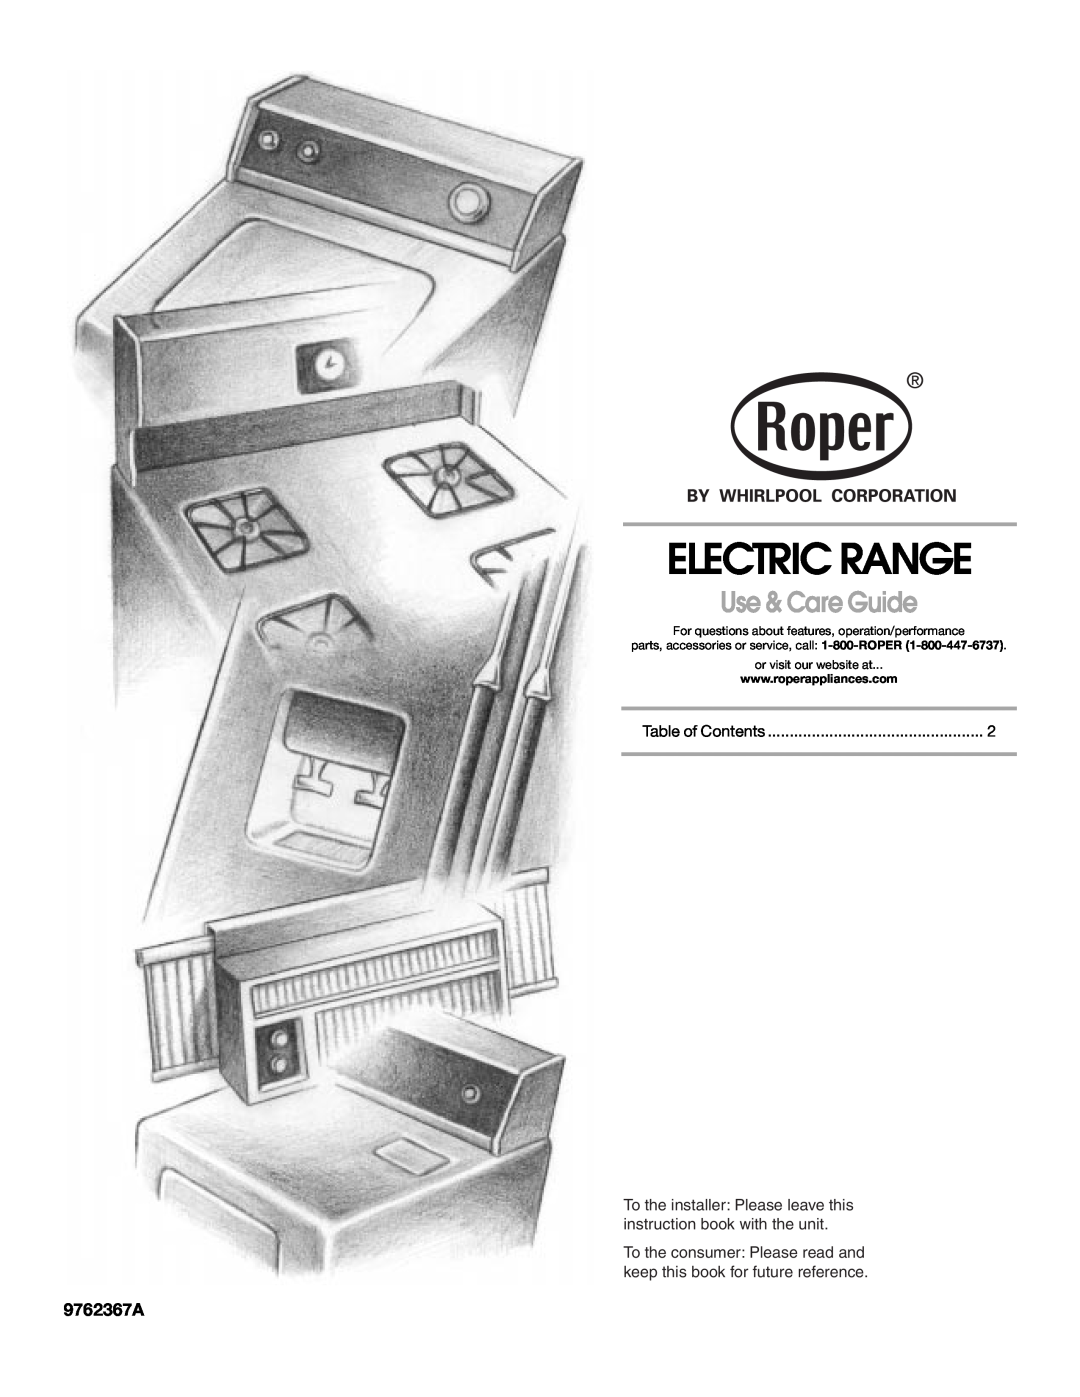 Whirlpool FEP310KV3 manual Electric Range, Use & Care Guide, parts, accessories or service, call 1-800-ROPER 